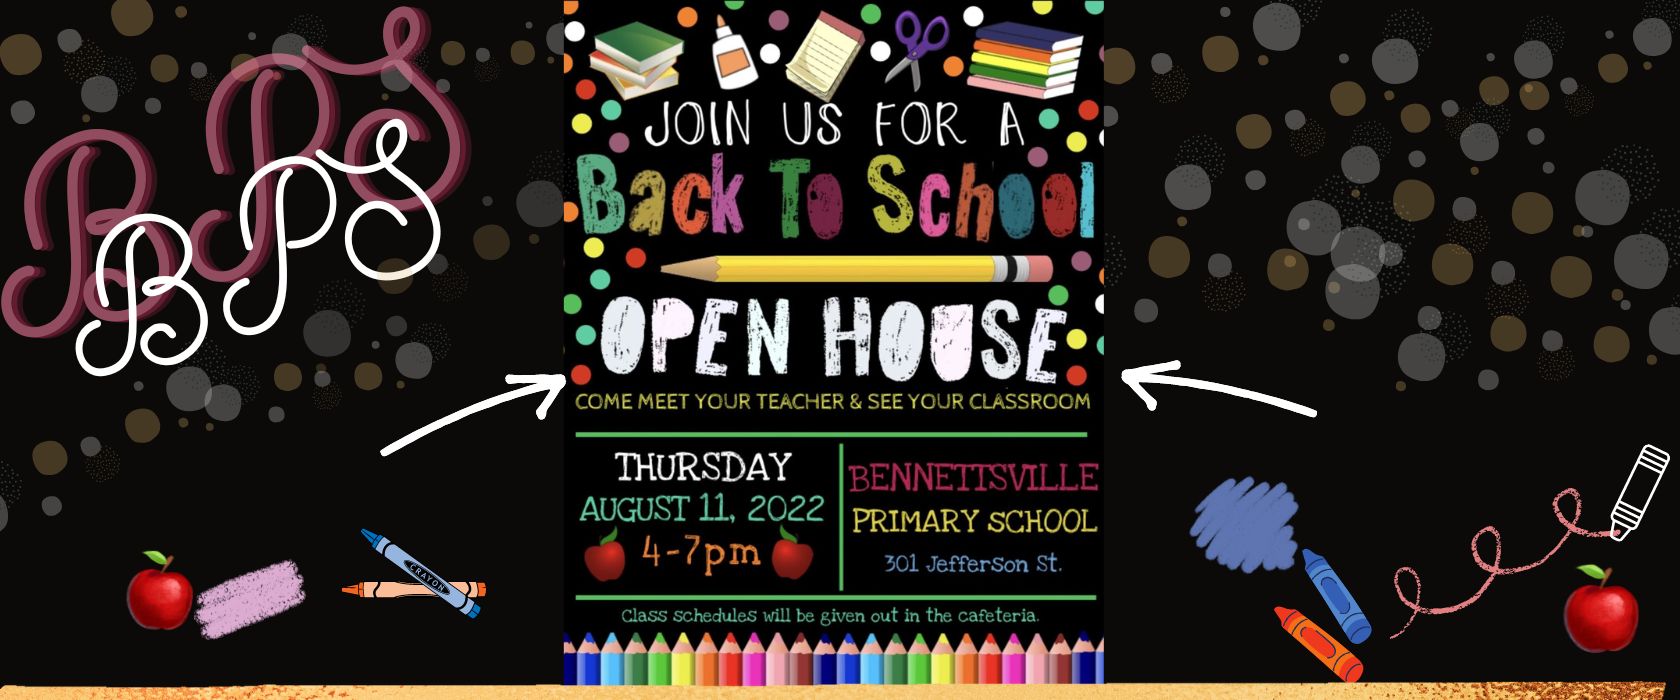 Open House at BPS